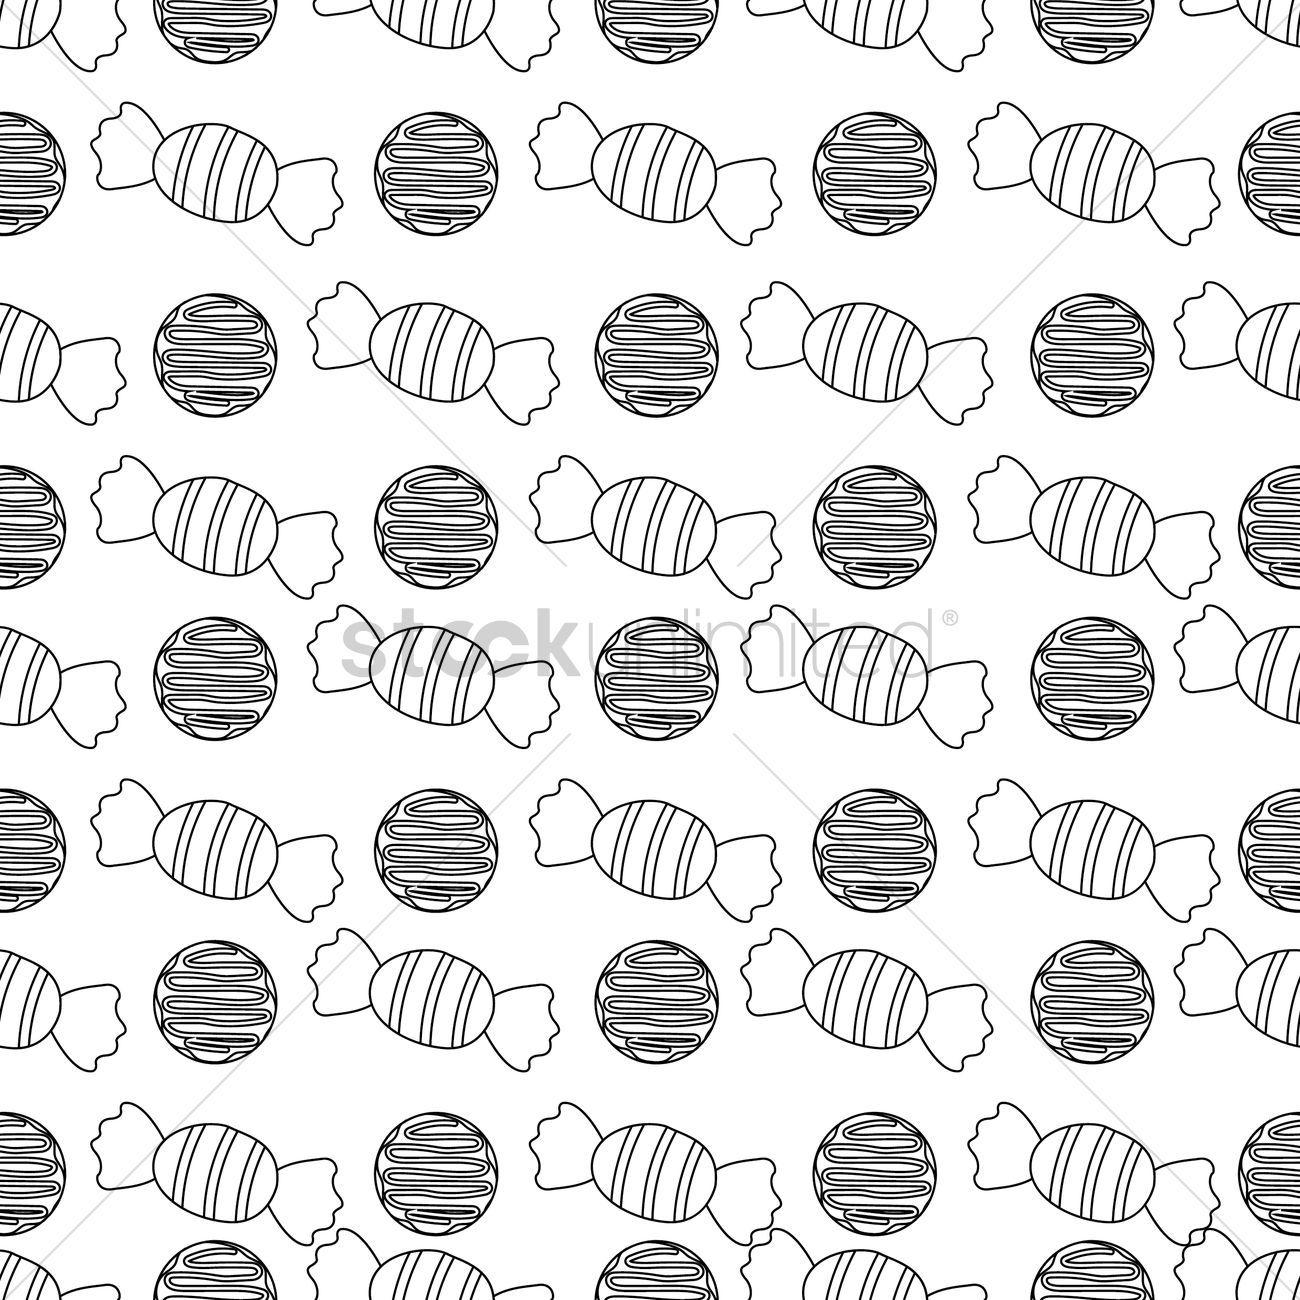 Free Candy wallpaper Vector Image